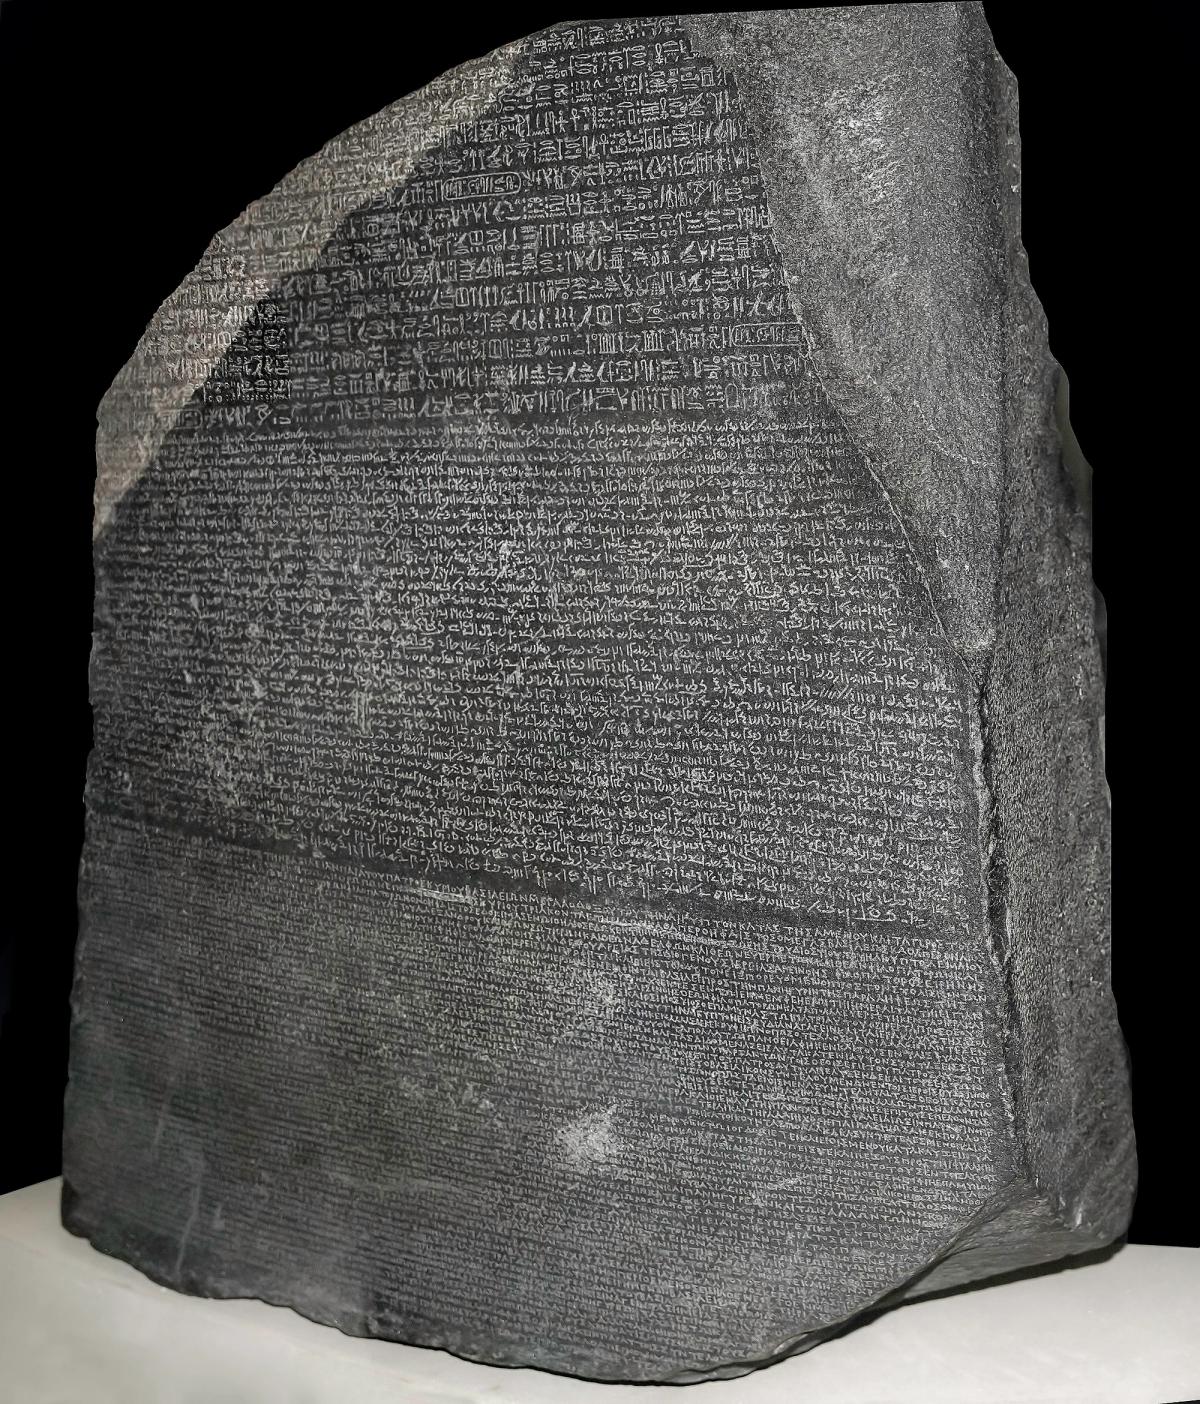 Egypt's "Great Revolt", which happened from 207 to 184 BC, is detailed on the Rosetta Stone Photo: Awikimate